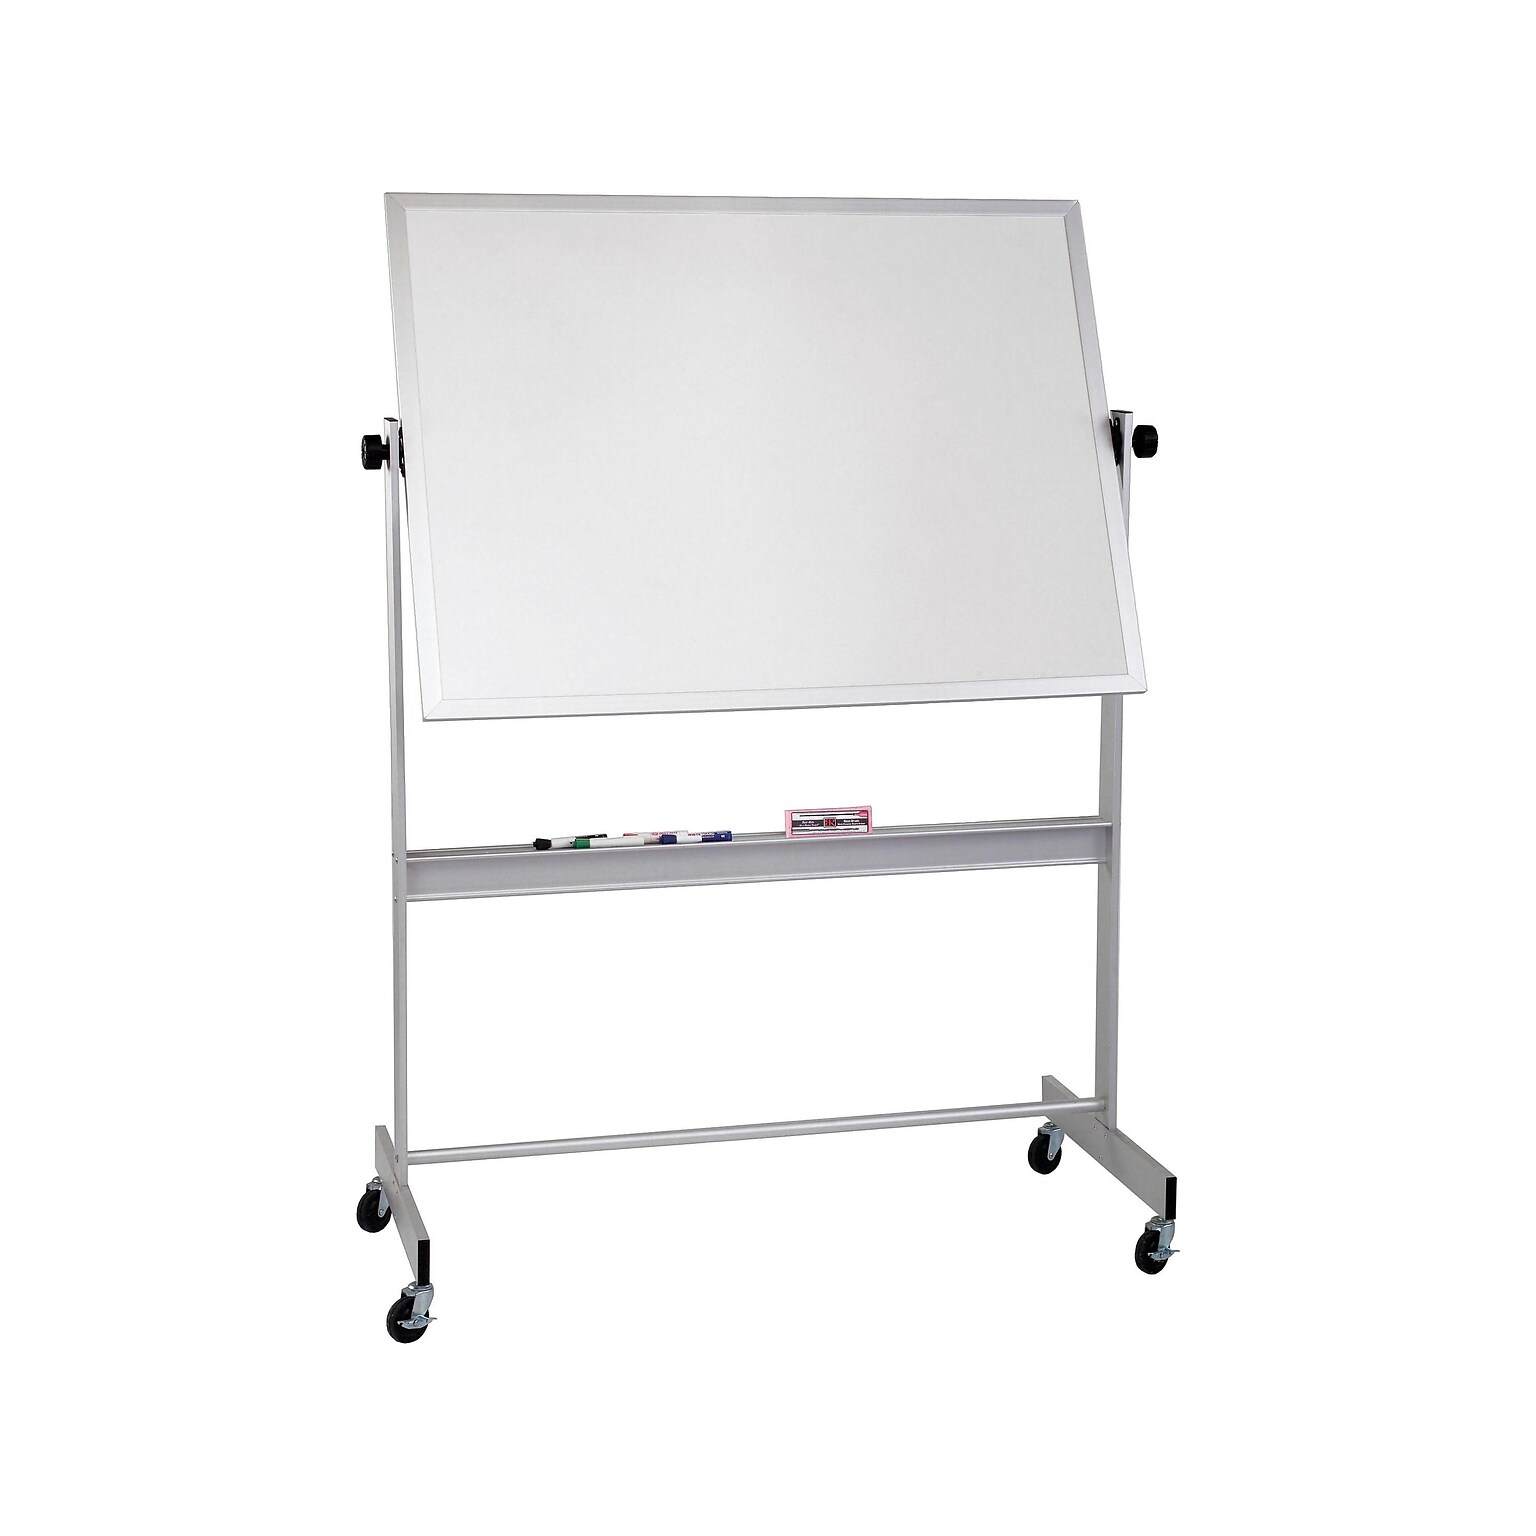 Best-Rite Deluxe Porcelain Dry-Erase Whiteboard, Anodized Aluminum Frame, 5 x 4 (668AF-DD)